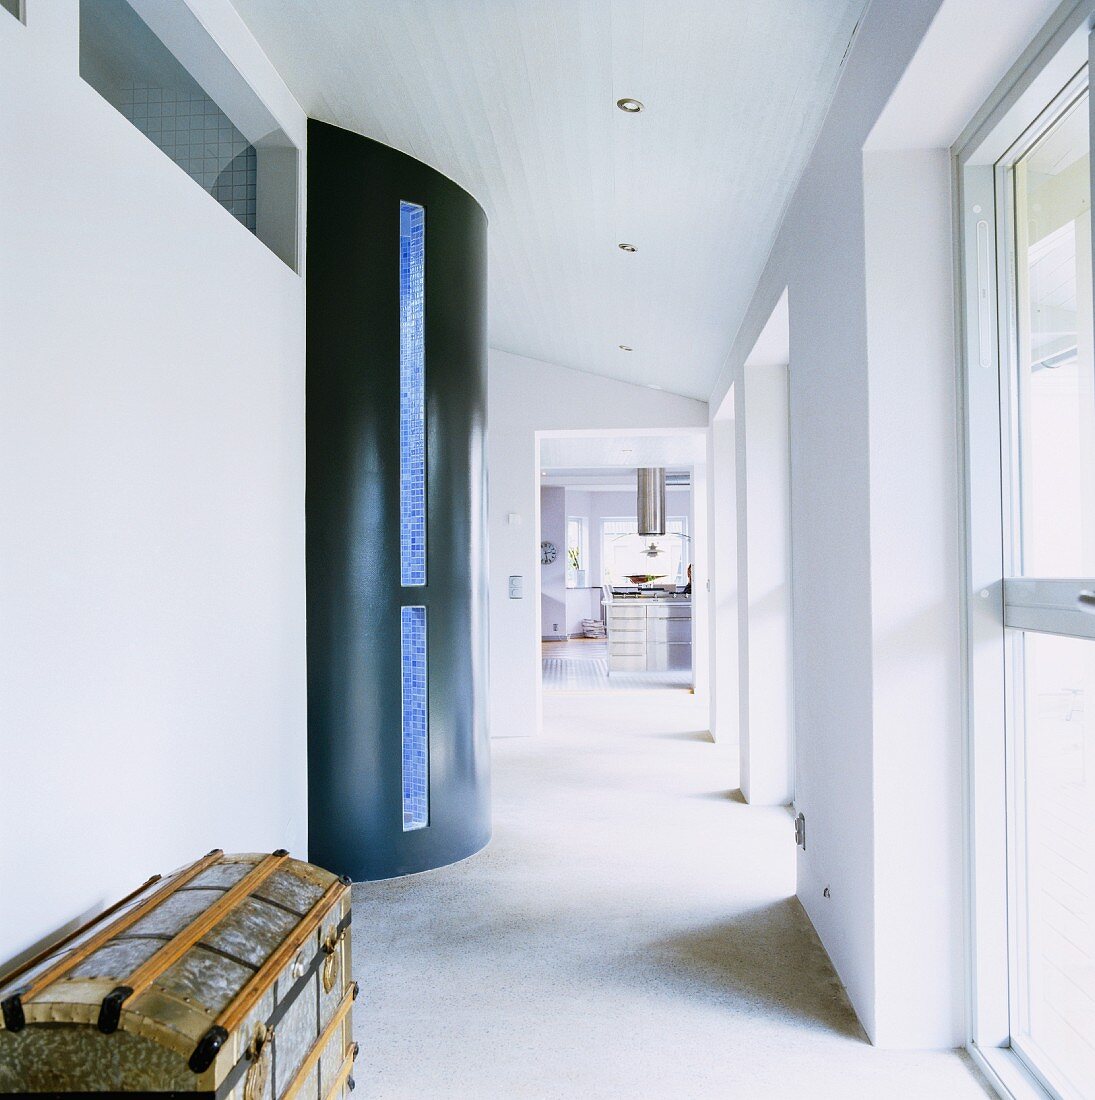 Semicircular protrusion with blue glass strip in corridor with windows along one side